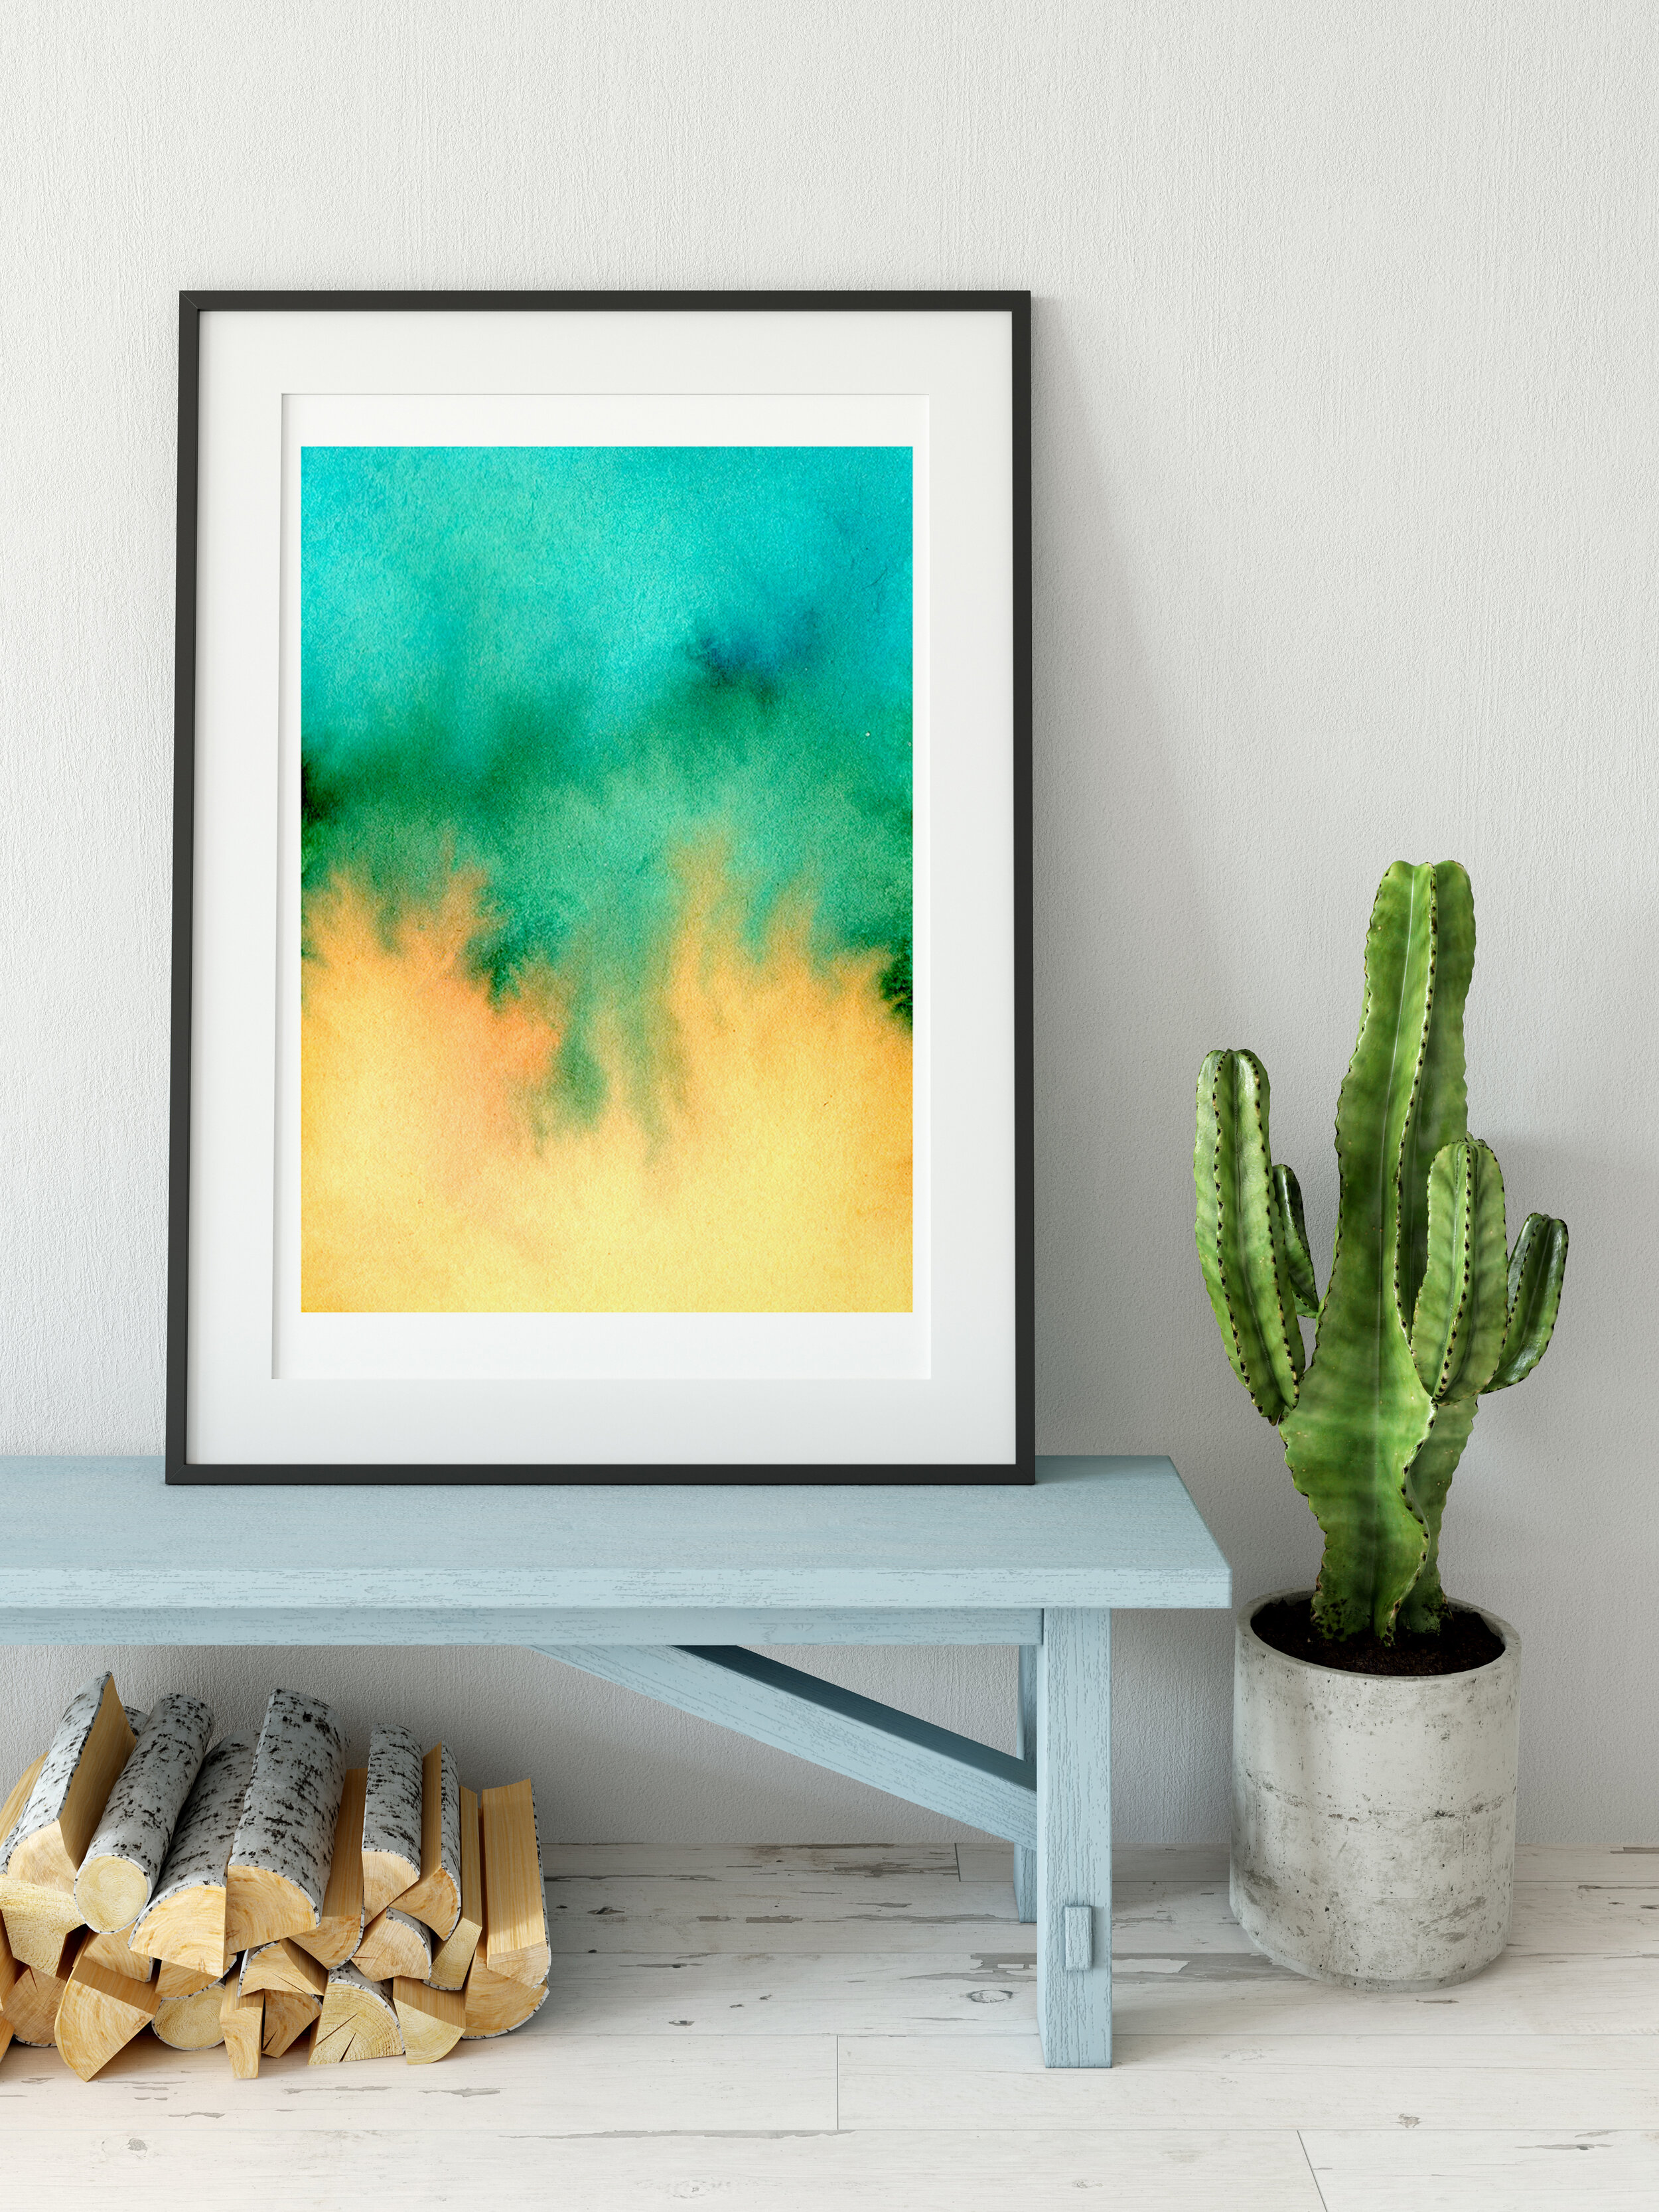 Colourful Abstract Wall Art In Yellow Orange and Teal 